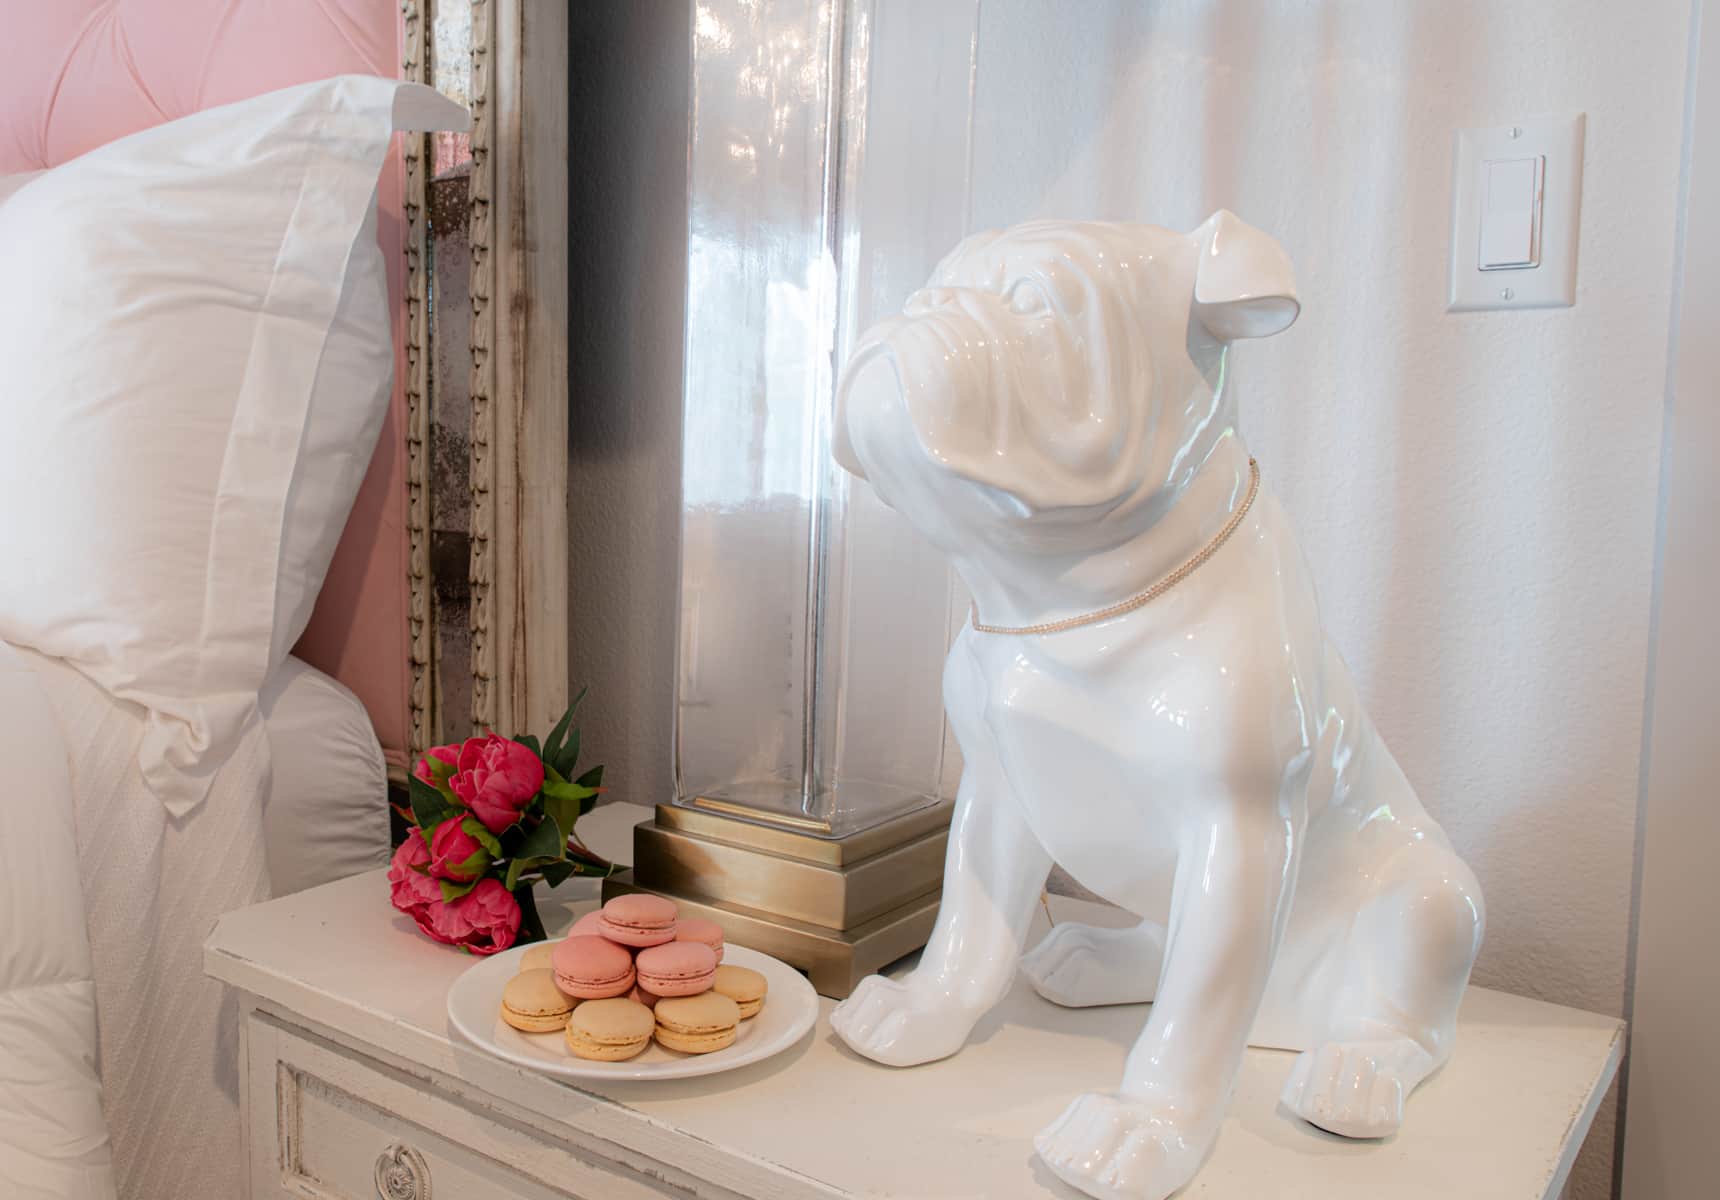 A small porcelain dog on a end table with a plate of french macaroons